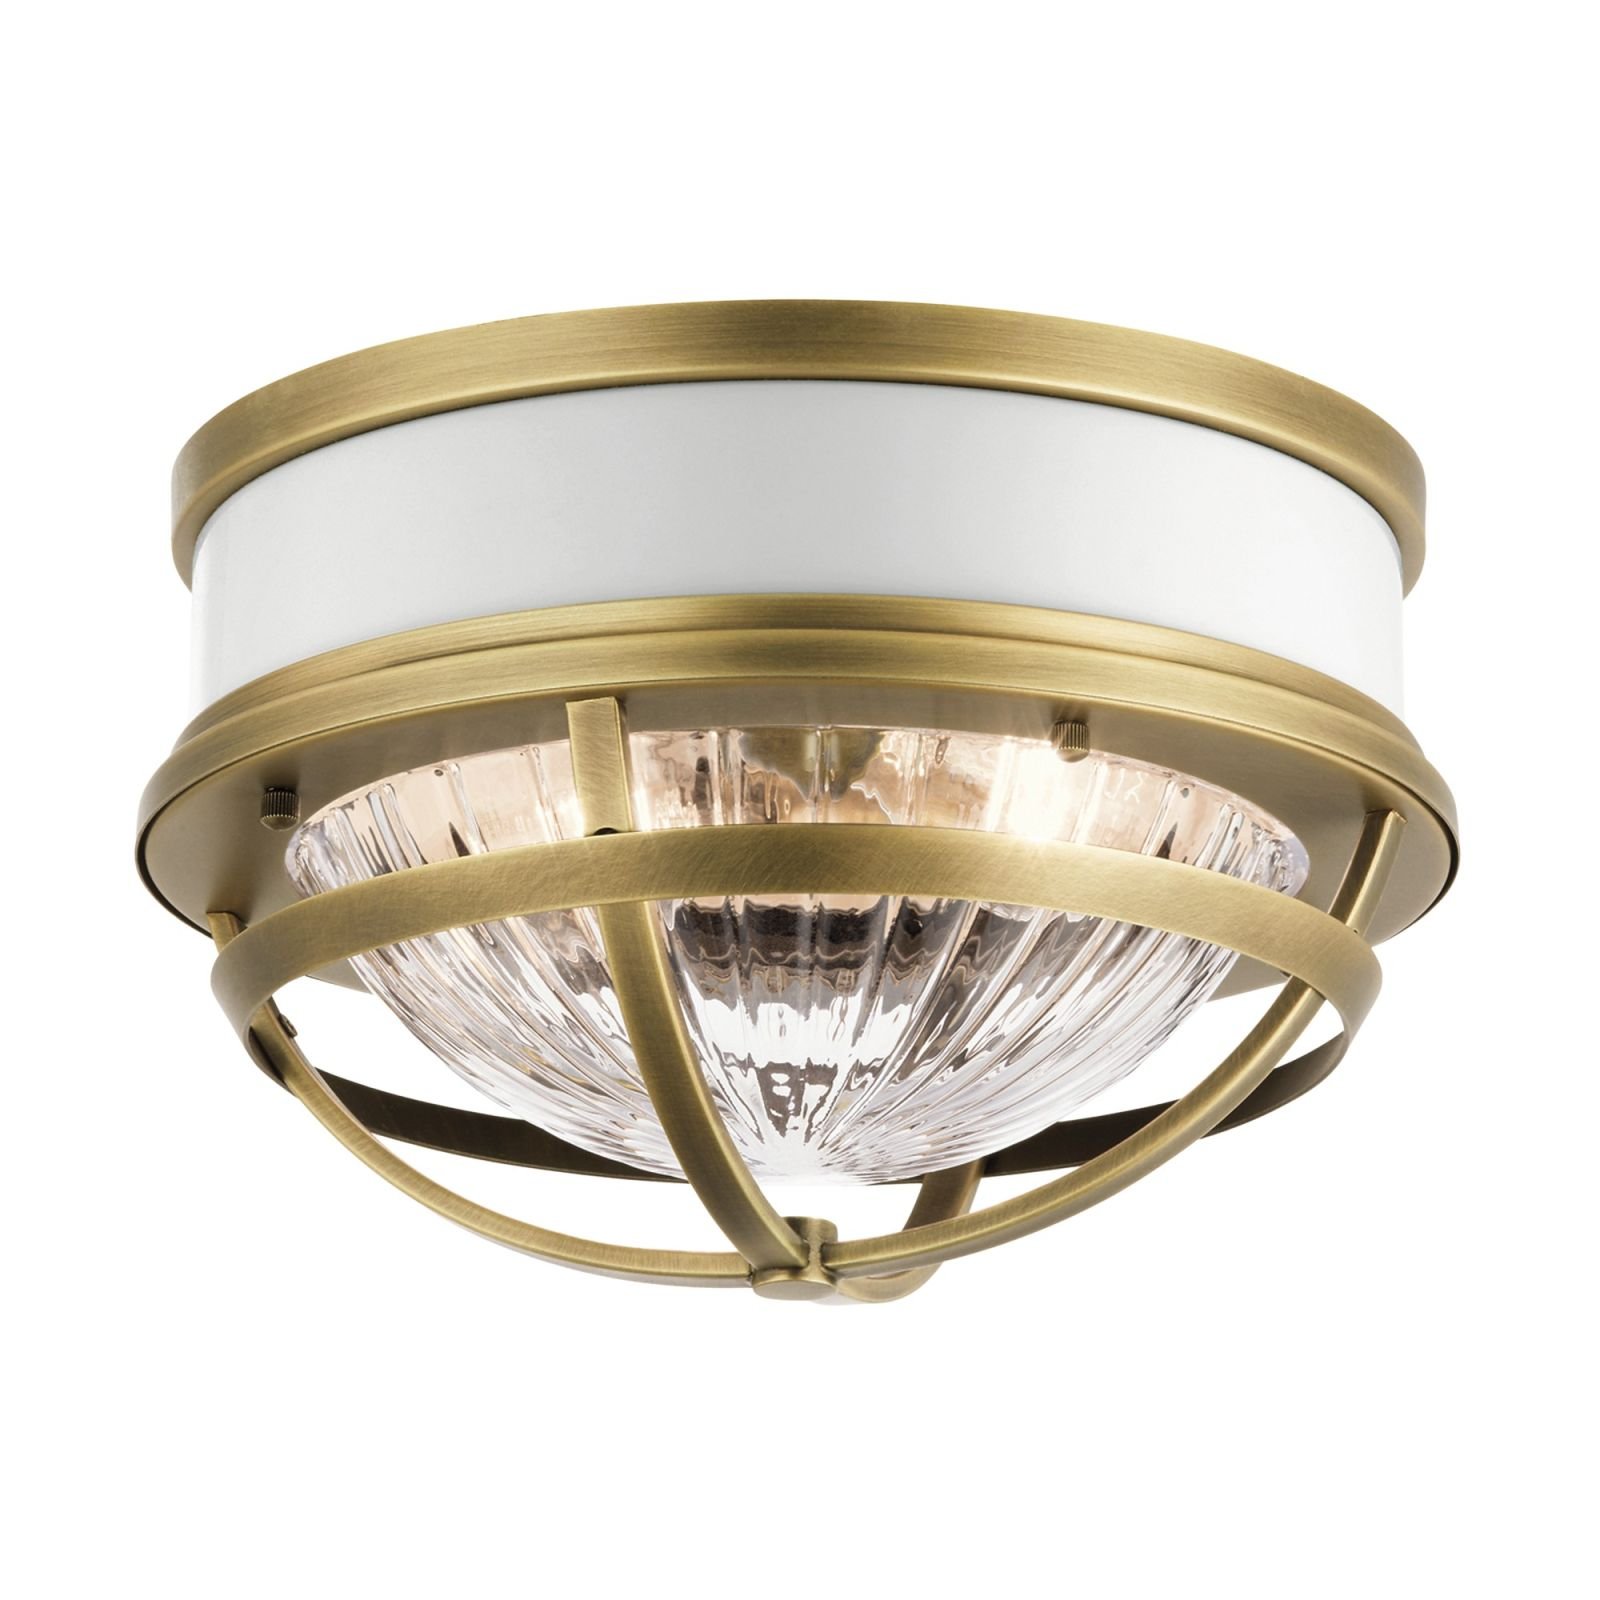 Tollis Flush Mount Light in a choice of Natural Brass or Brushed Nickel